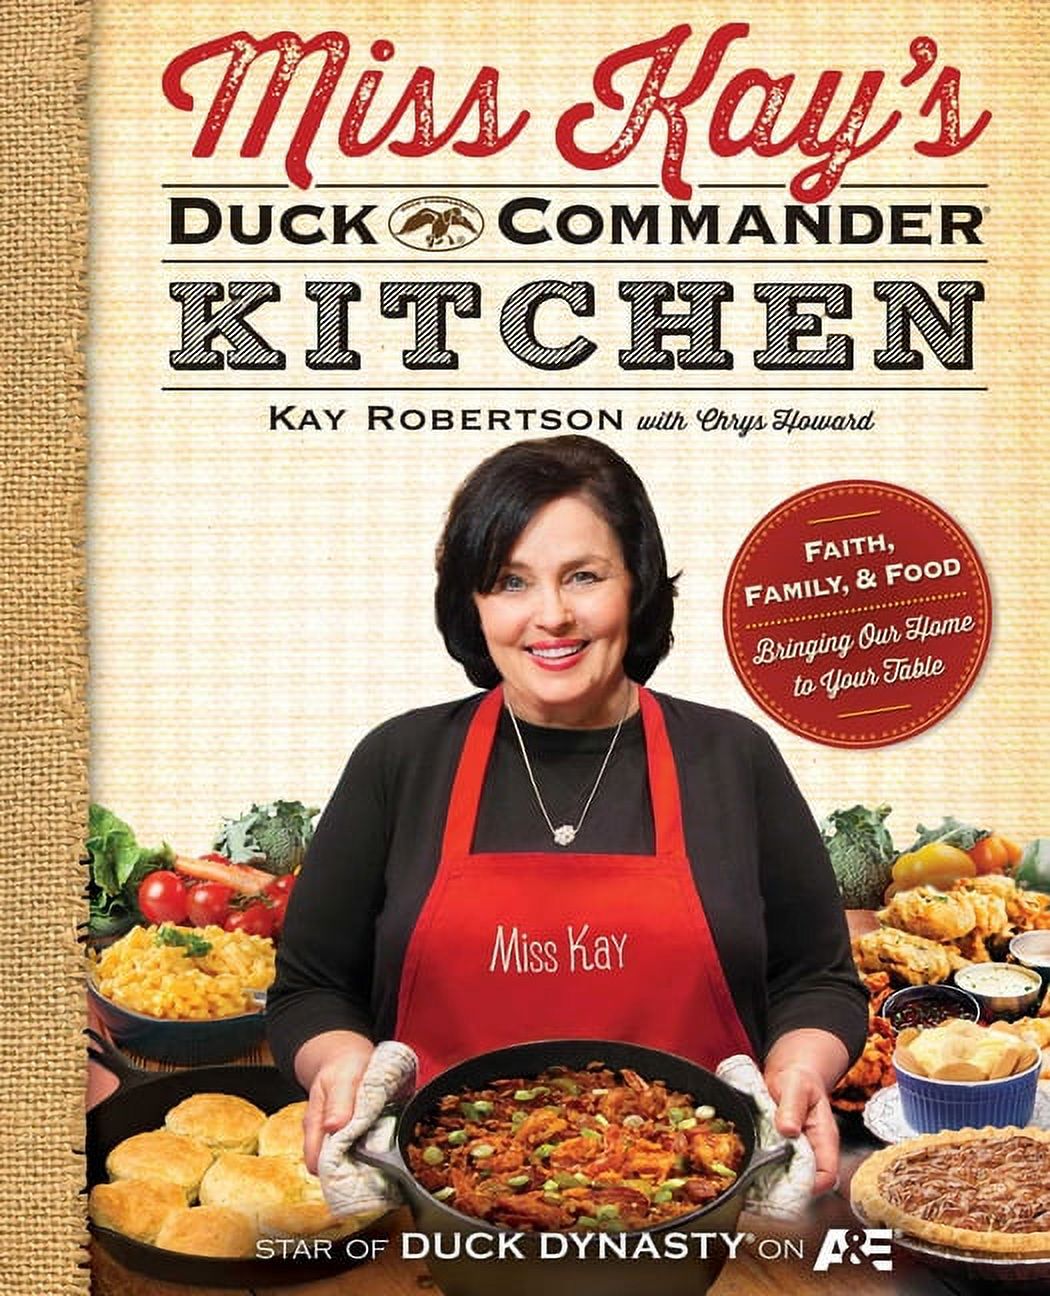 Miss Kay&apos;s Duck Commander Kitchen: Faith, Family, and Food--Bringing Our Home to Your Table, Original ed. (Paperback) - image 1 of 2